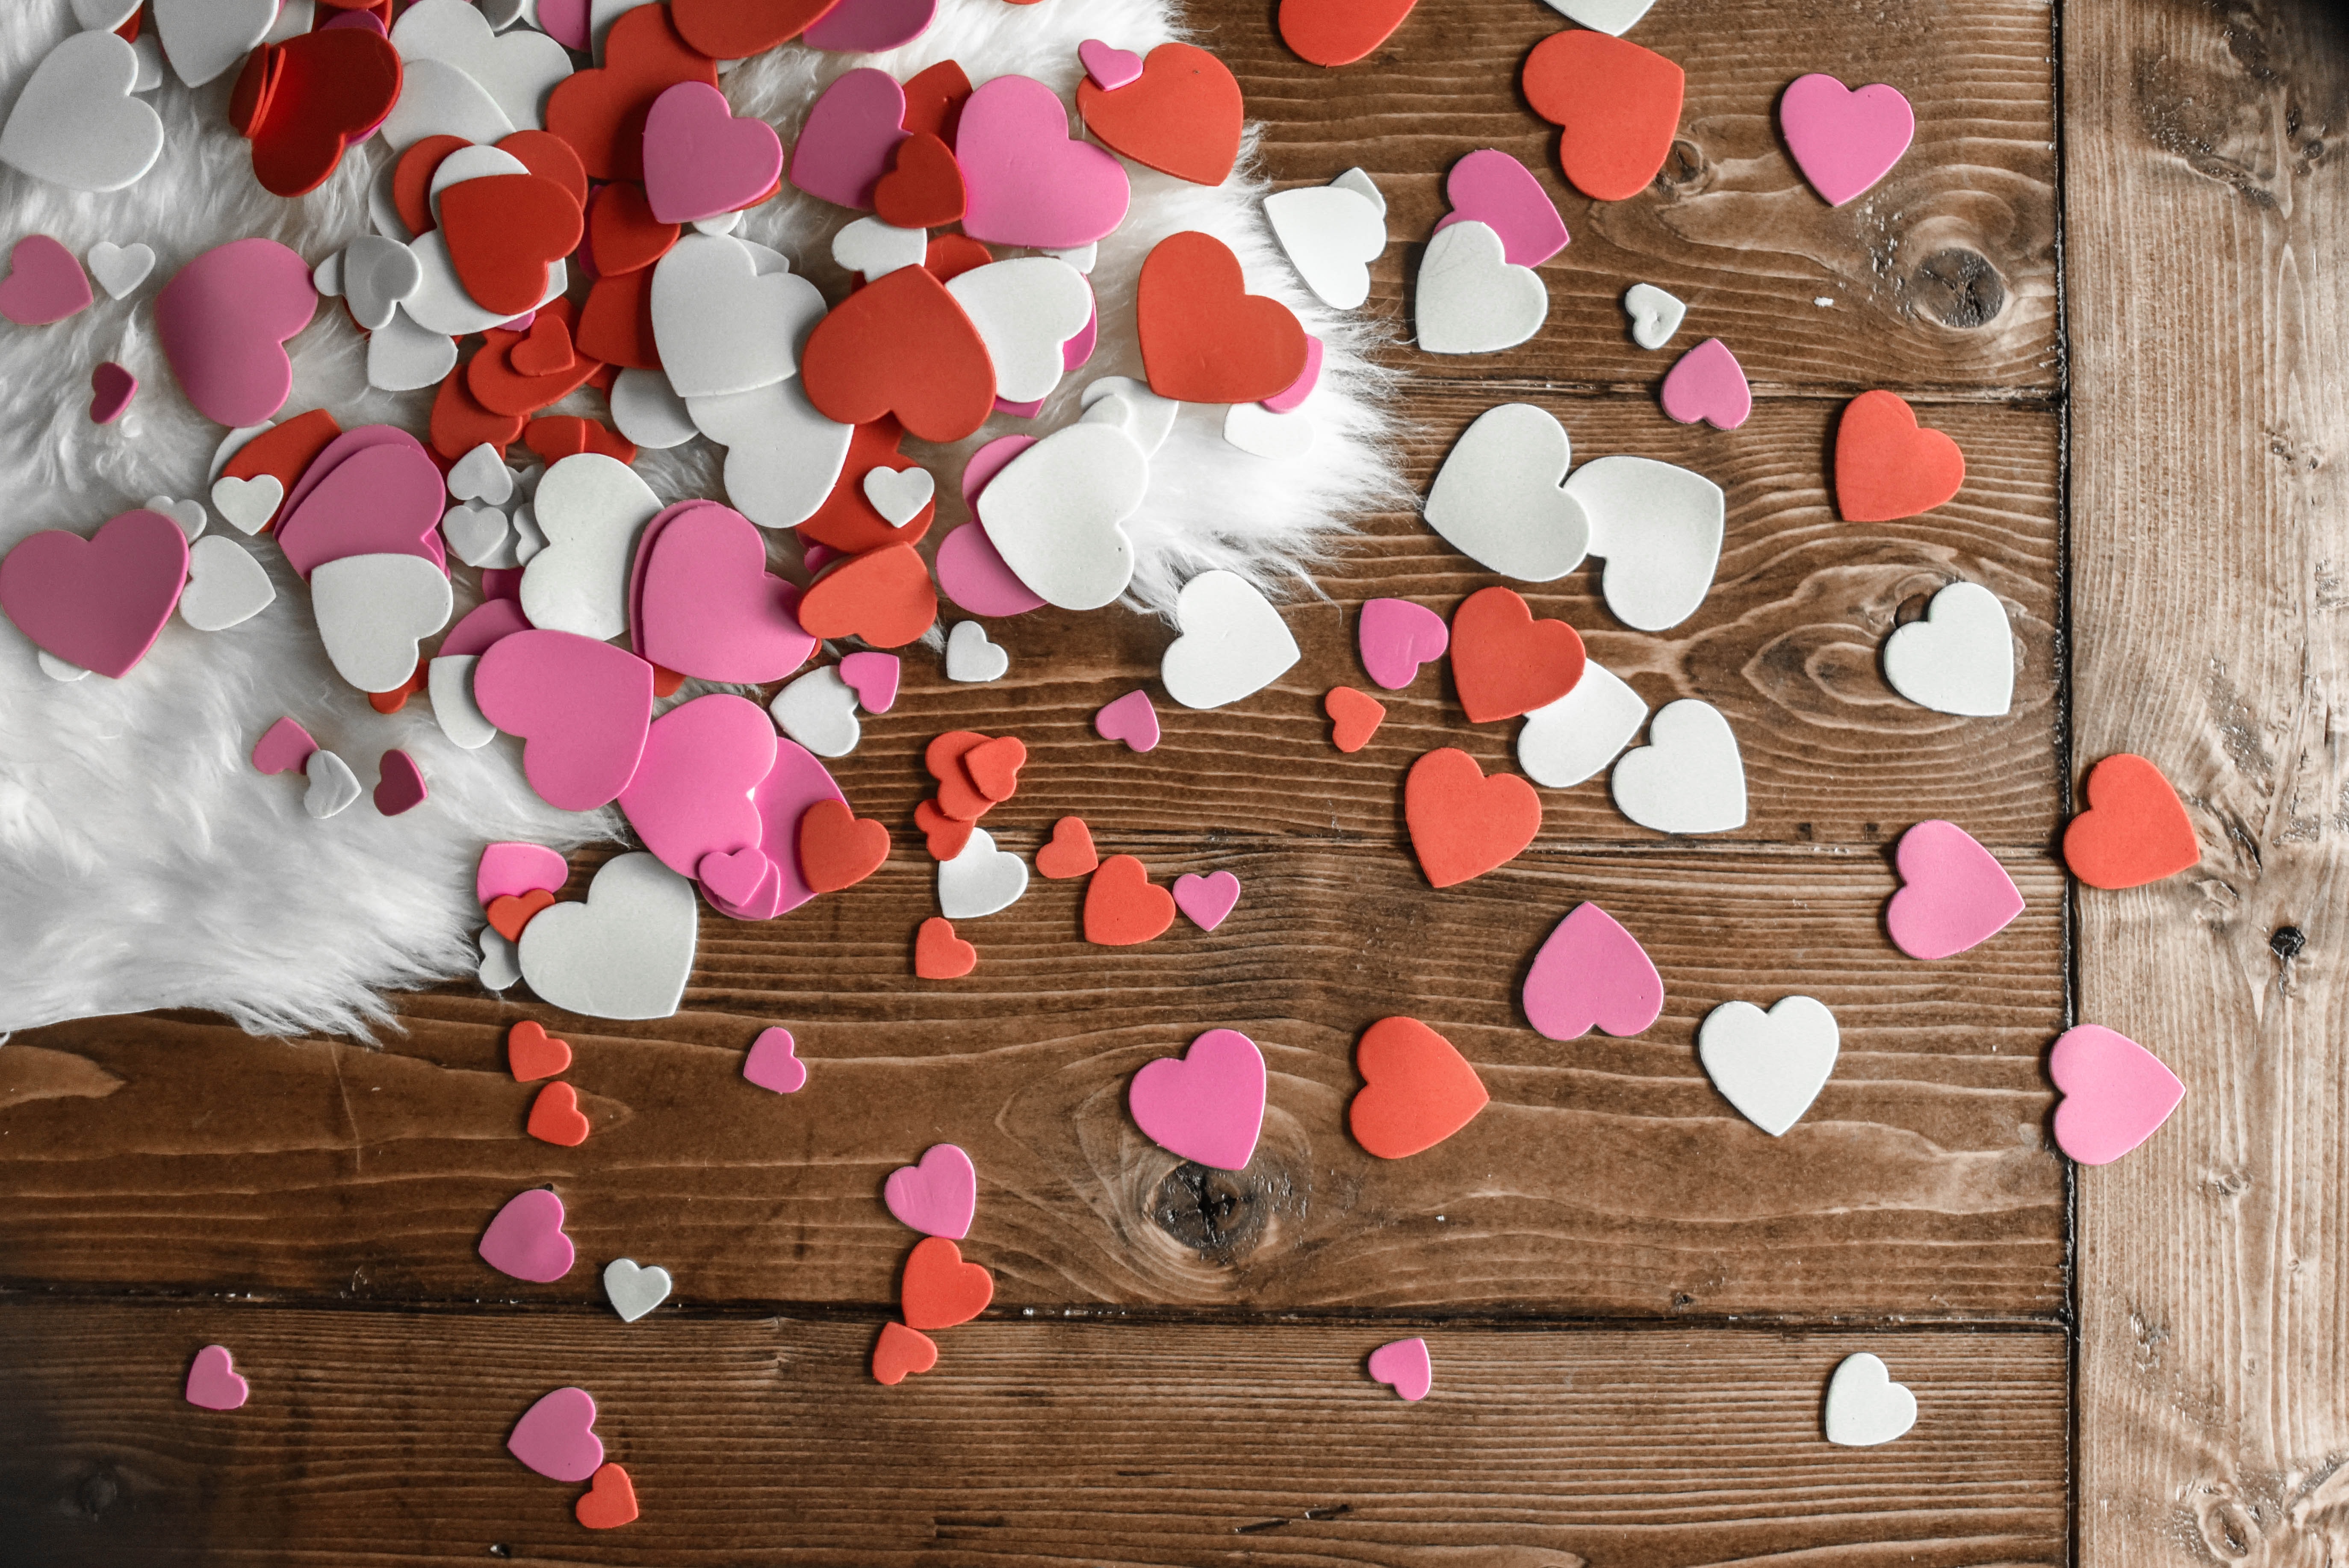 4 Quick Ways to Make This Valentine's Day Special